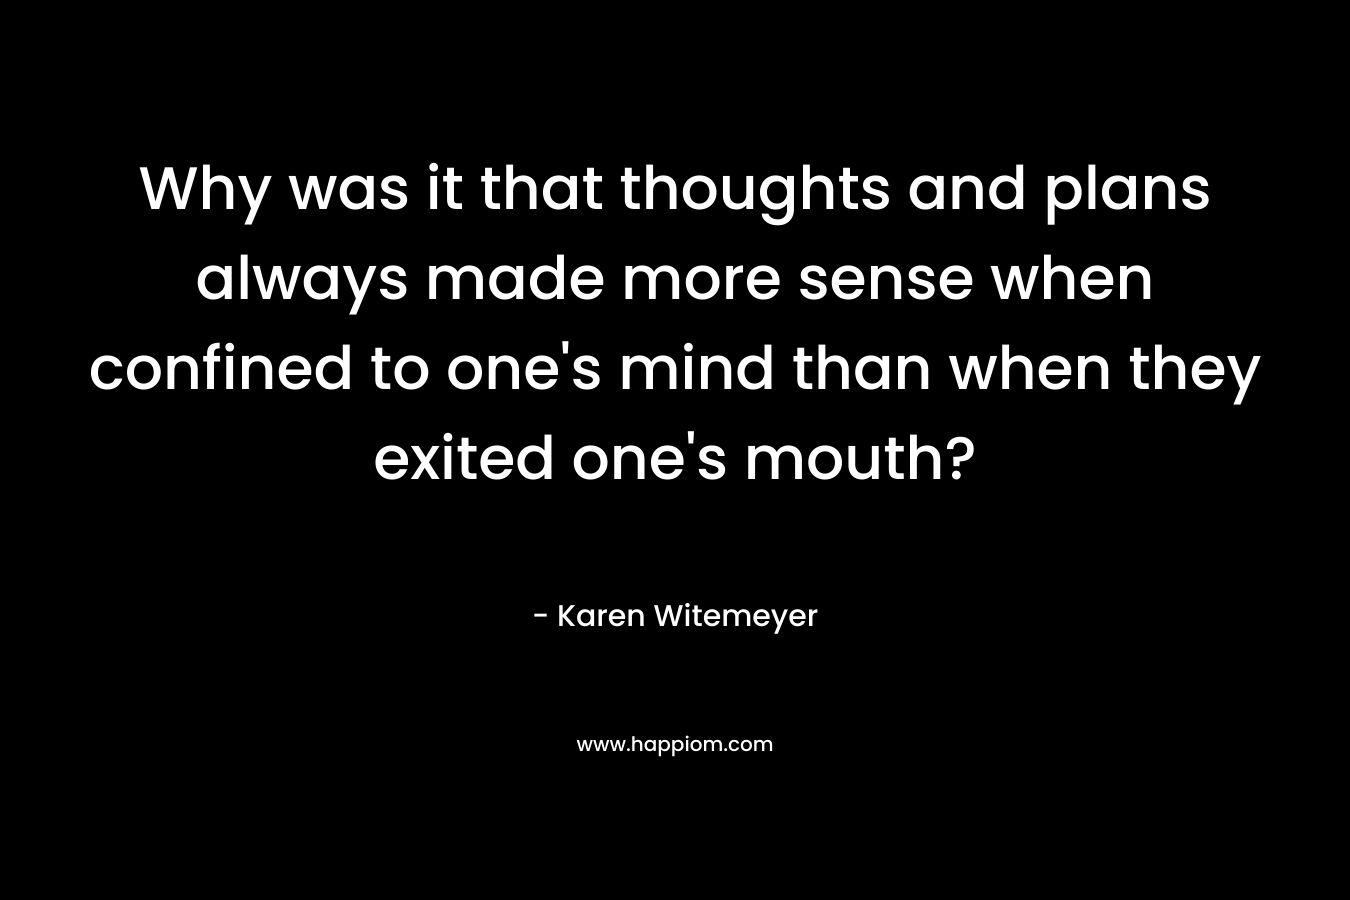 Why was it that thoughts and plans always made more sense when confined to one's mind than when they exited one's mouth?